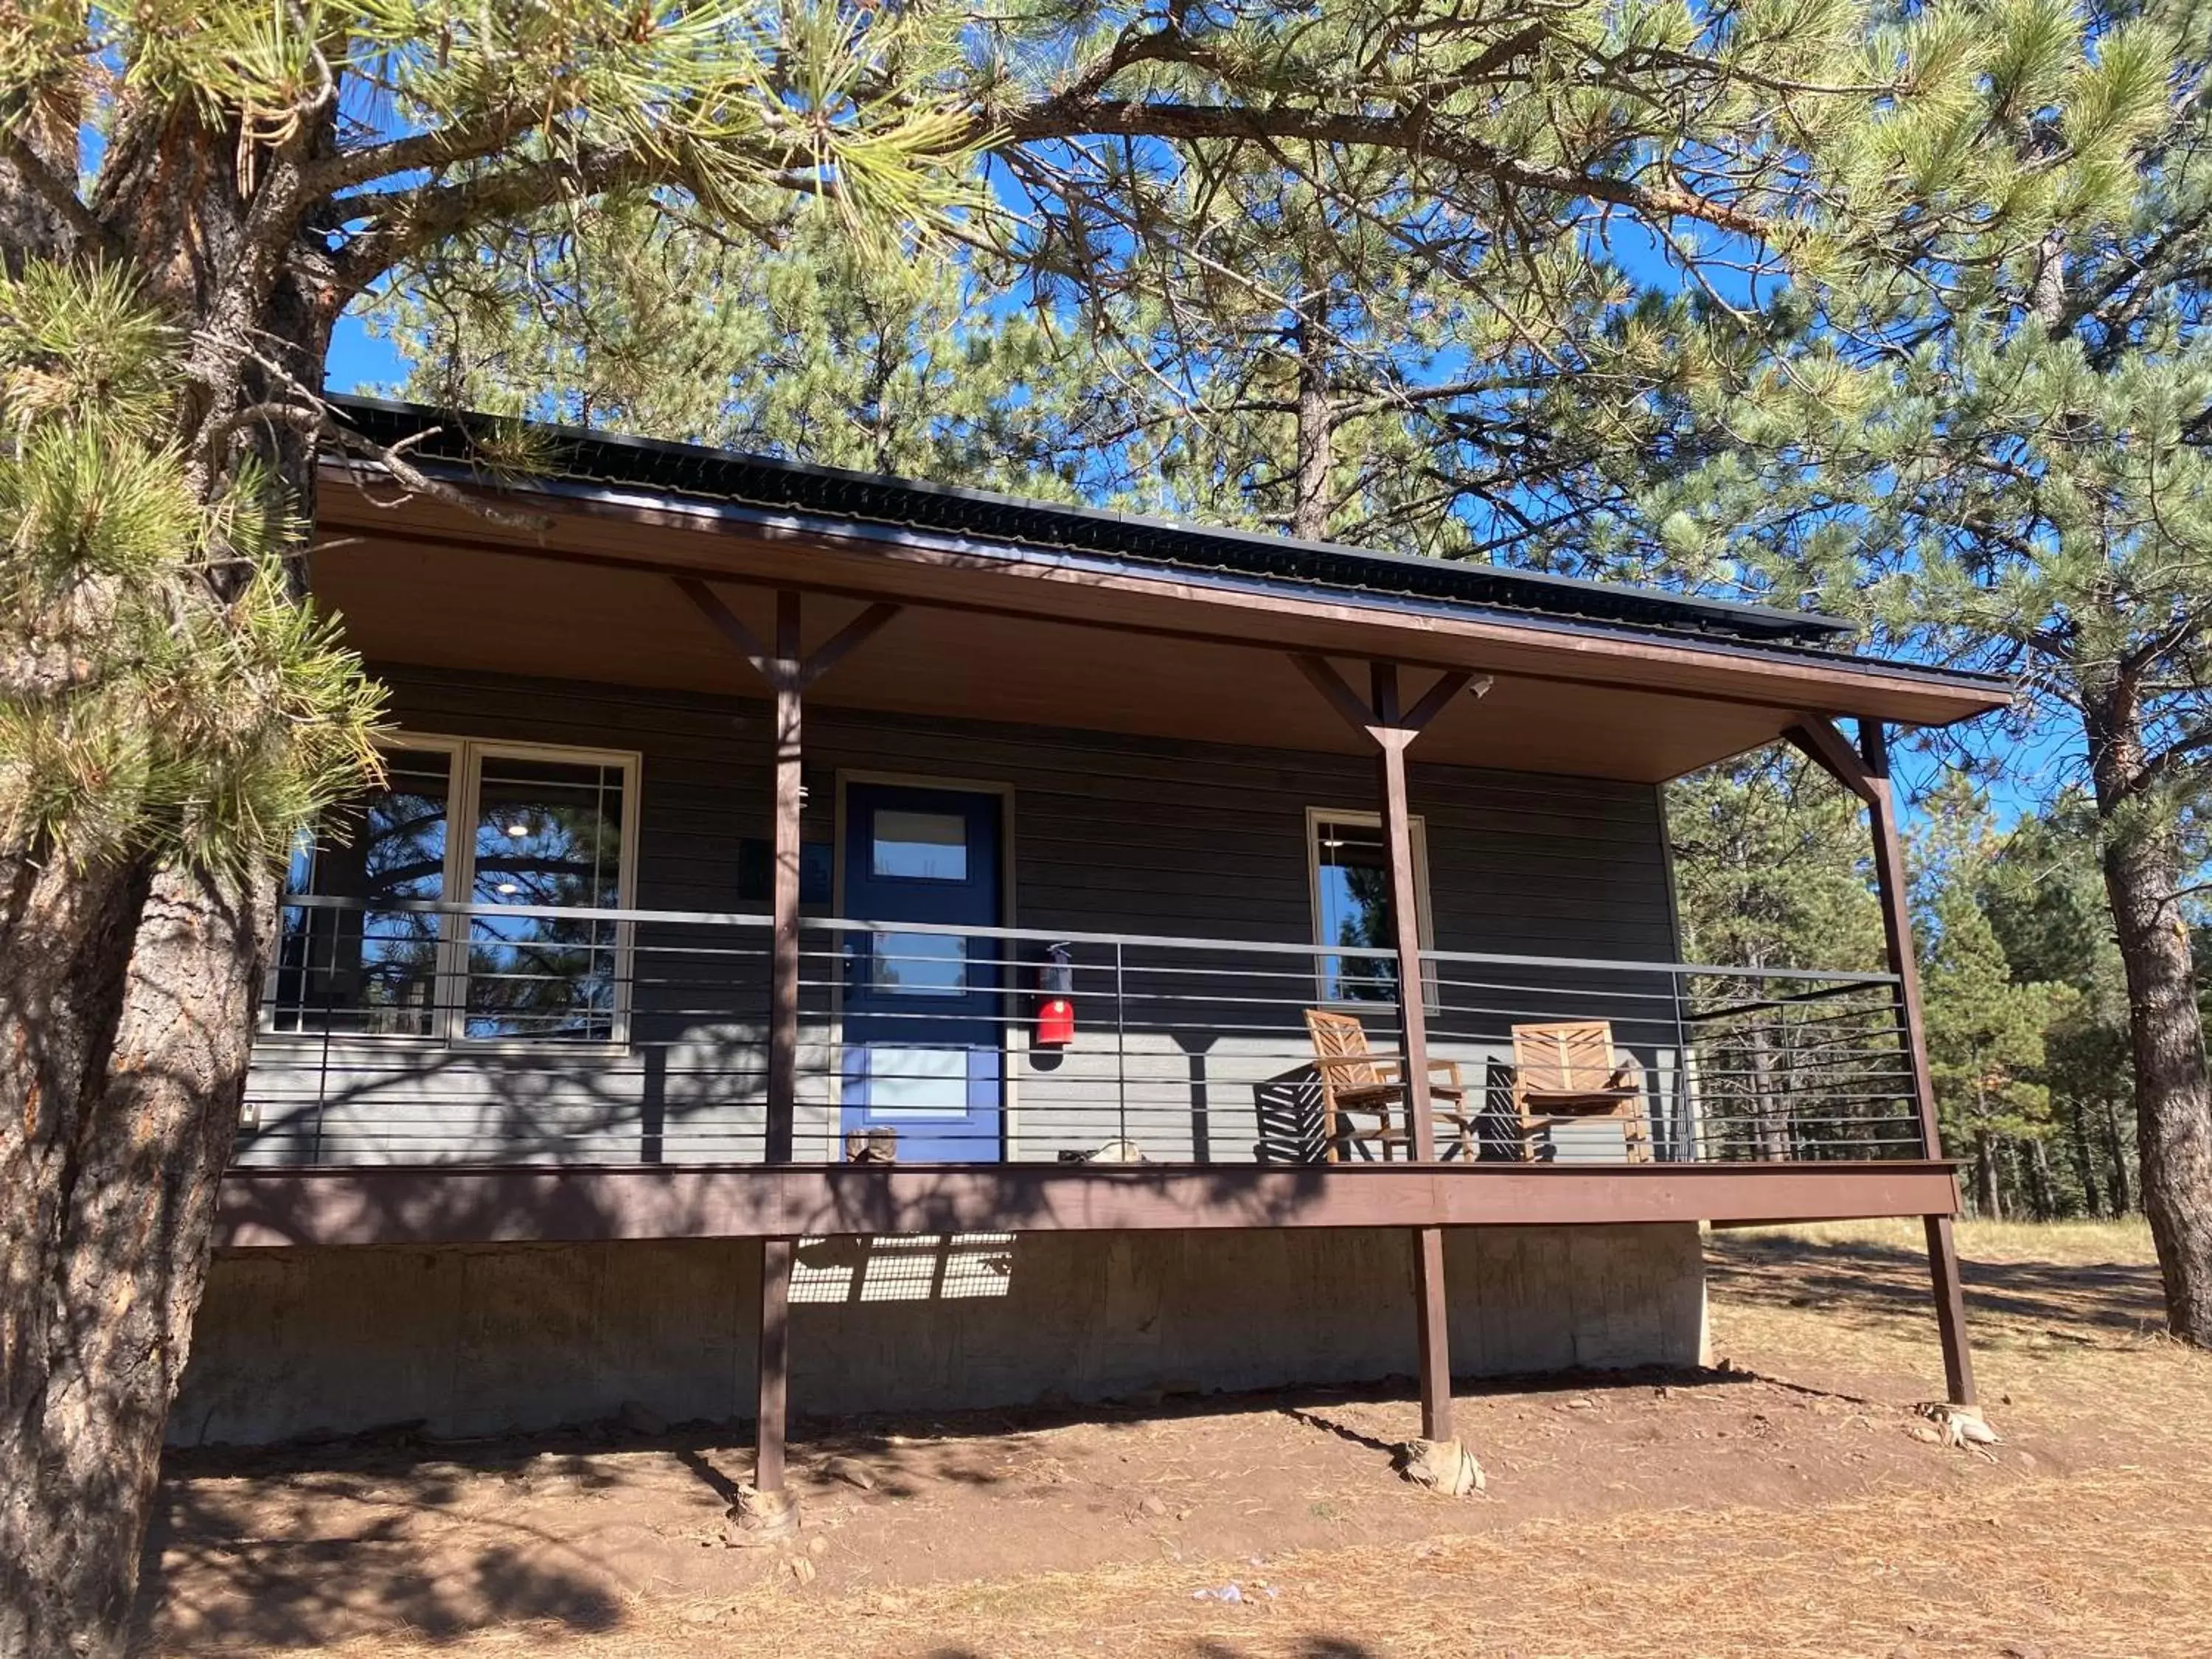 Property building in The Retreat at Angel Fire